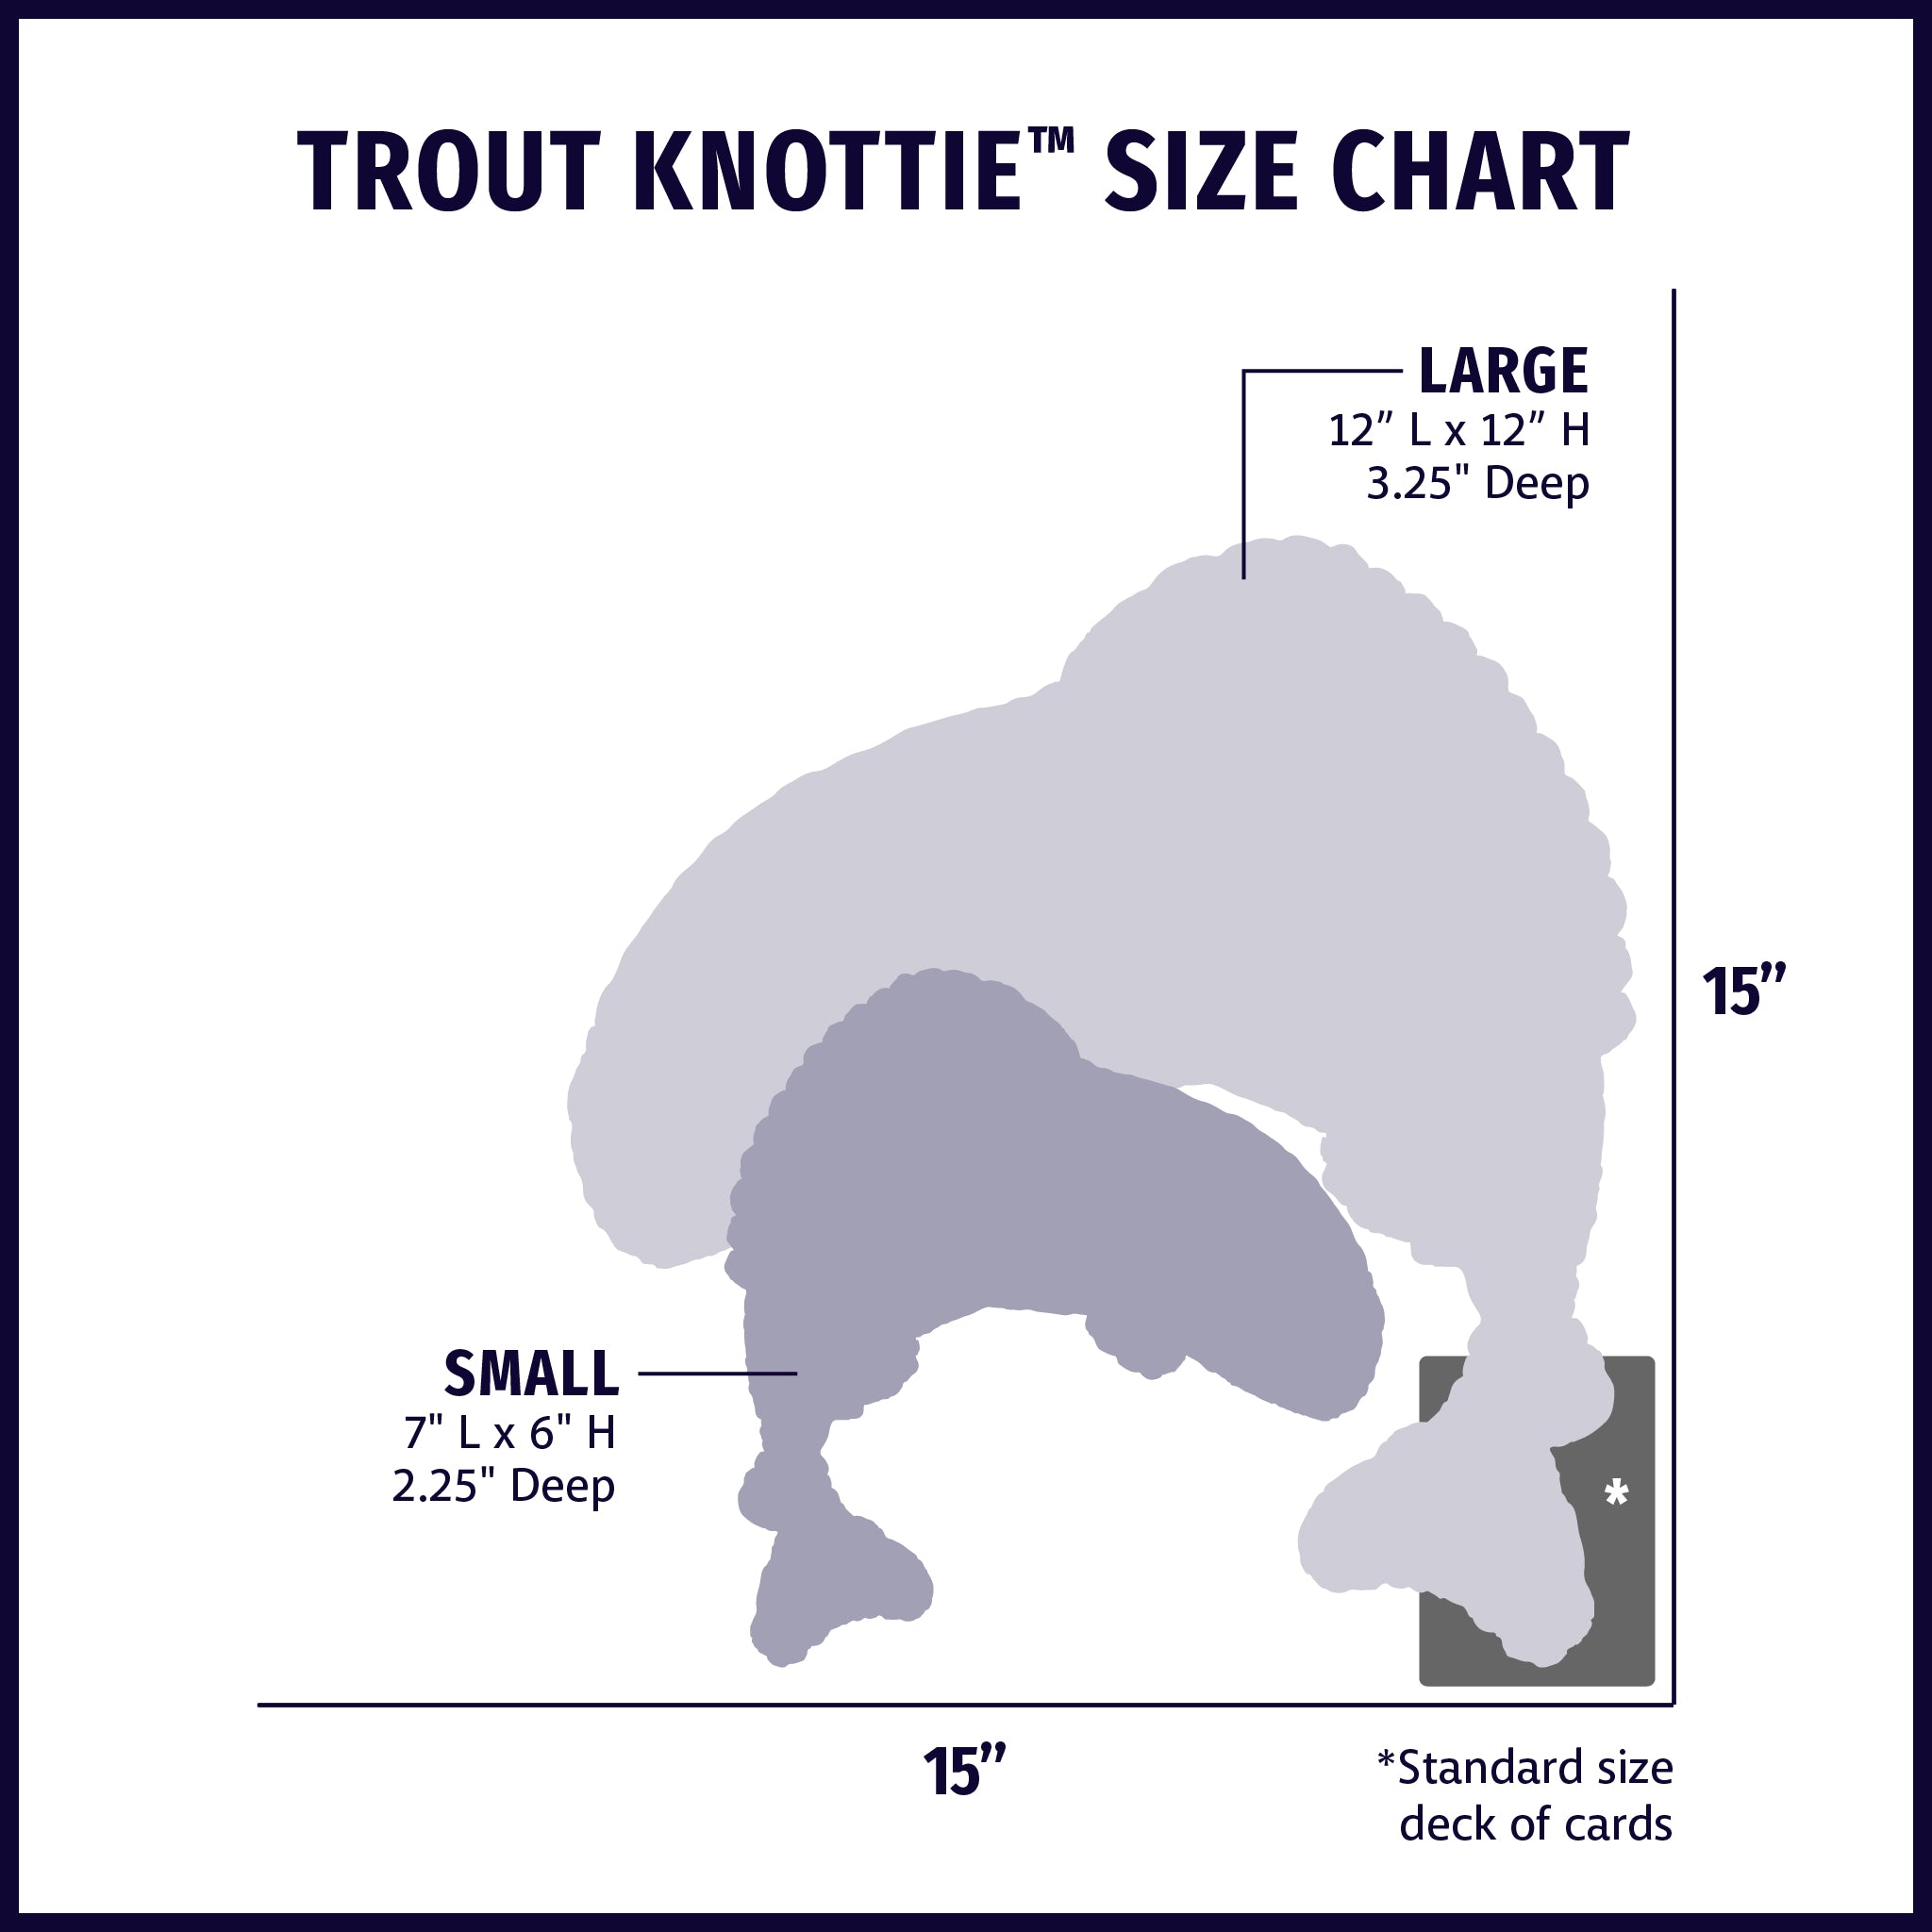 Size chart displaying Trout Knottie® plush dog toy silhouettes in small and large with approximate dimensions of each size compared to standard size deck of cards.